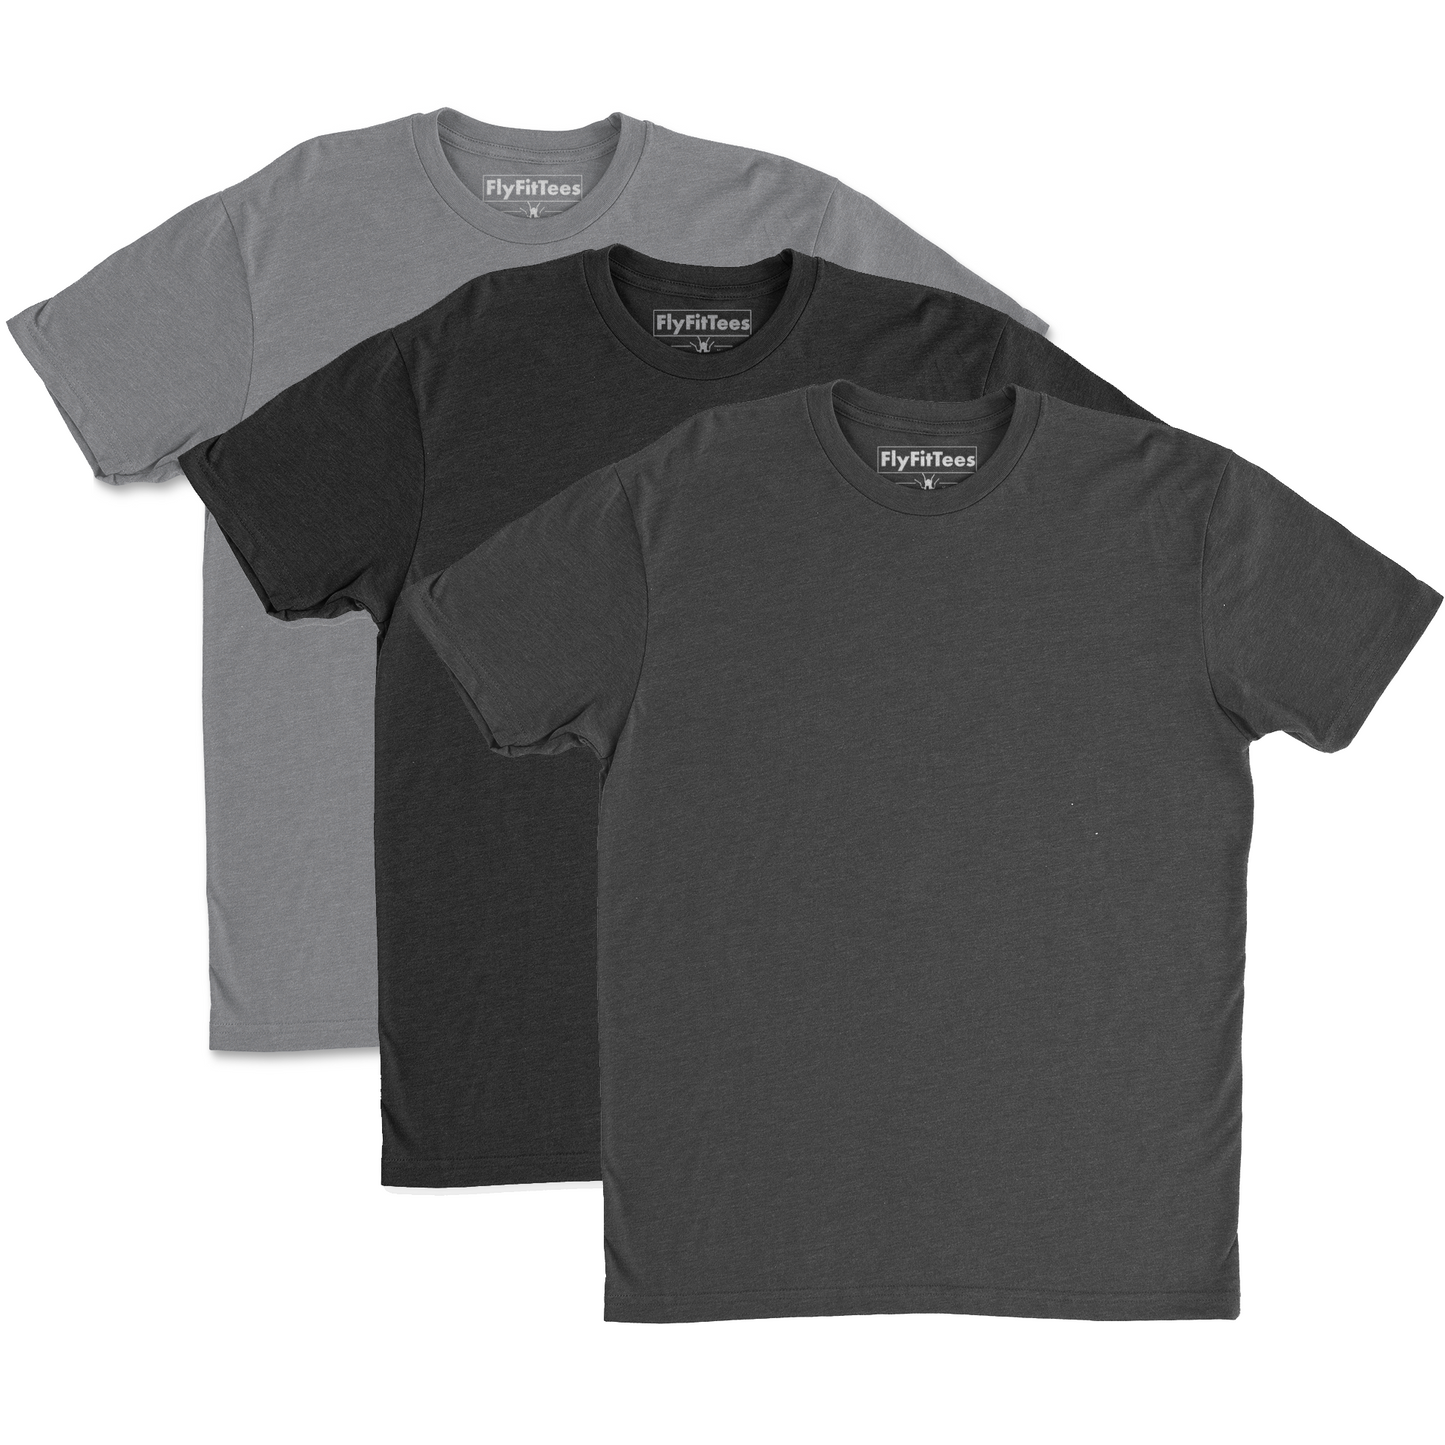 SoFly Original Perfect Fit Tee - 3 Pack - Shades Of Grey